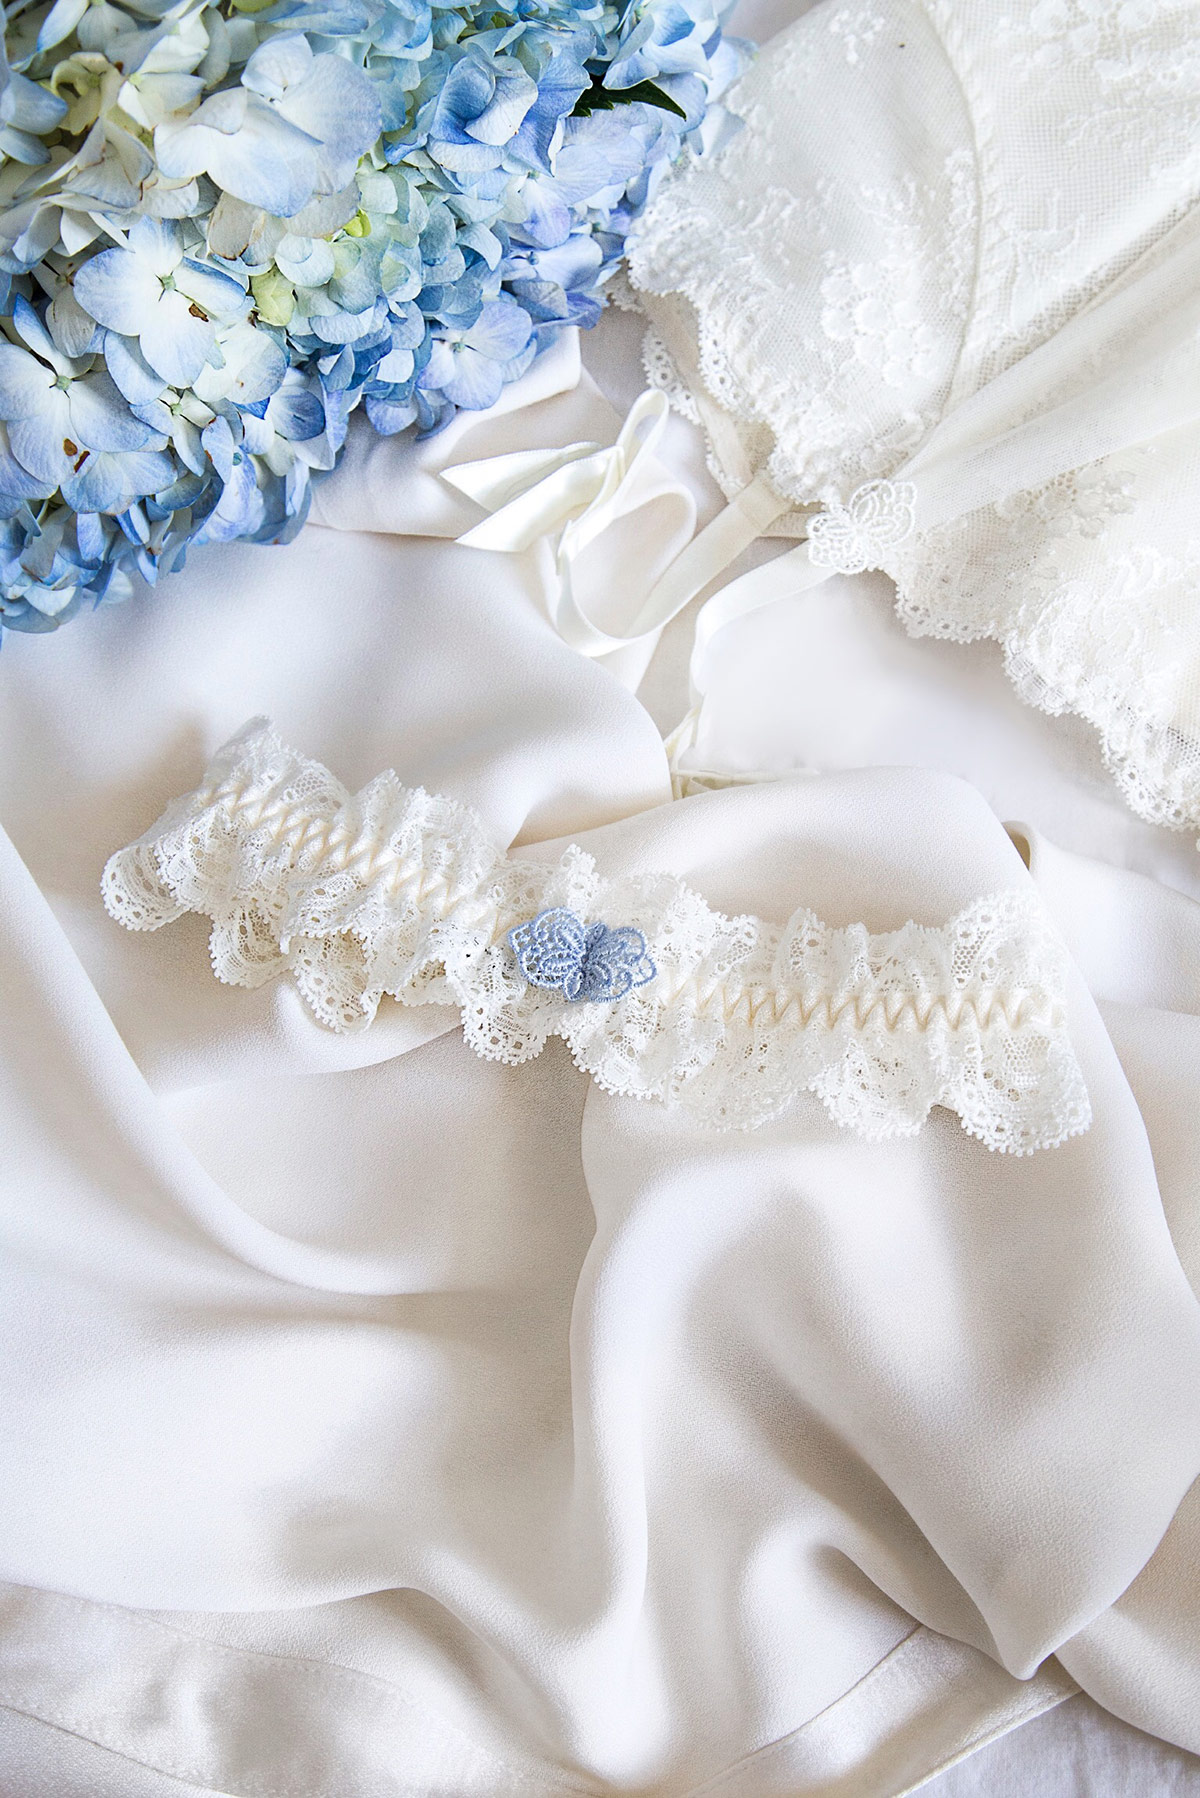 Bridal Essentials - Now that you found your bridal gown, the next step is choosing the finishing touches. Read on for my bridal essentials checklist and advice on picking the perfect accessories.